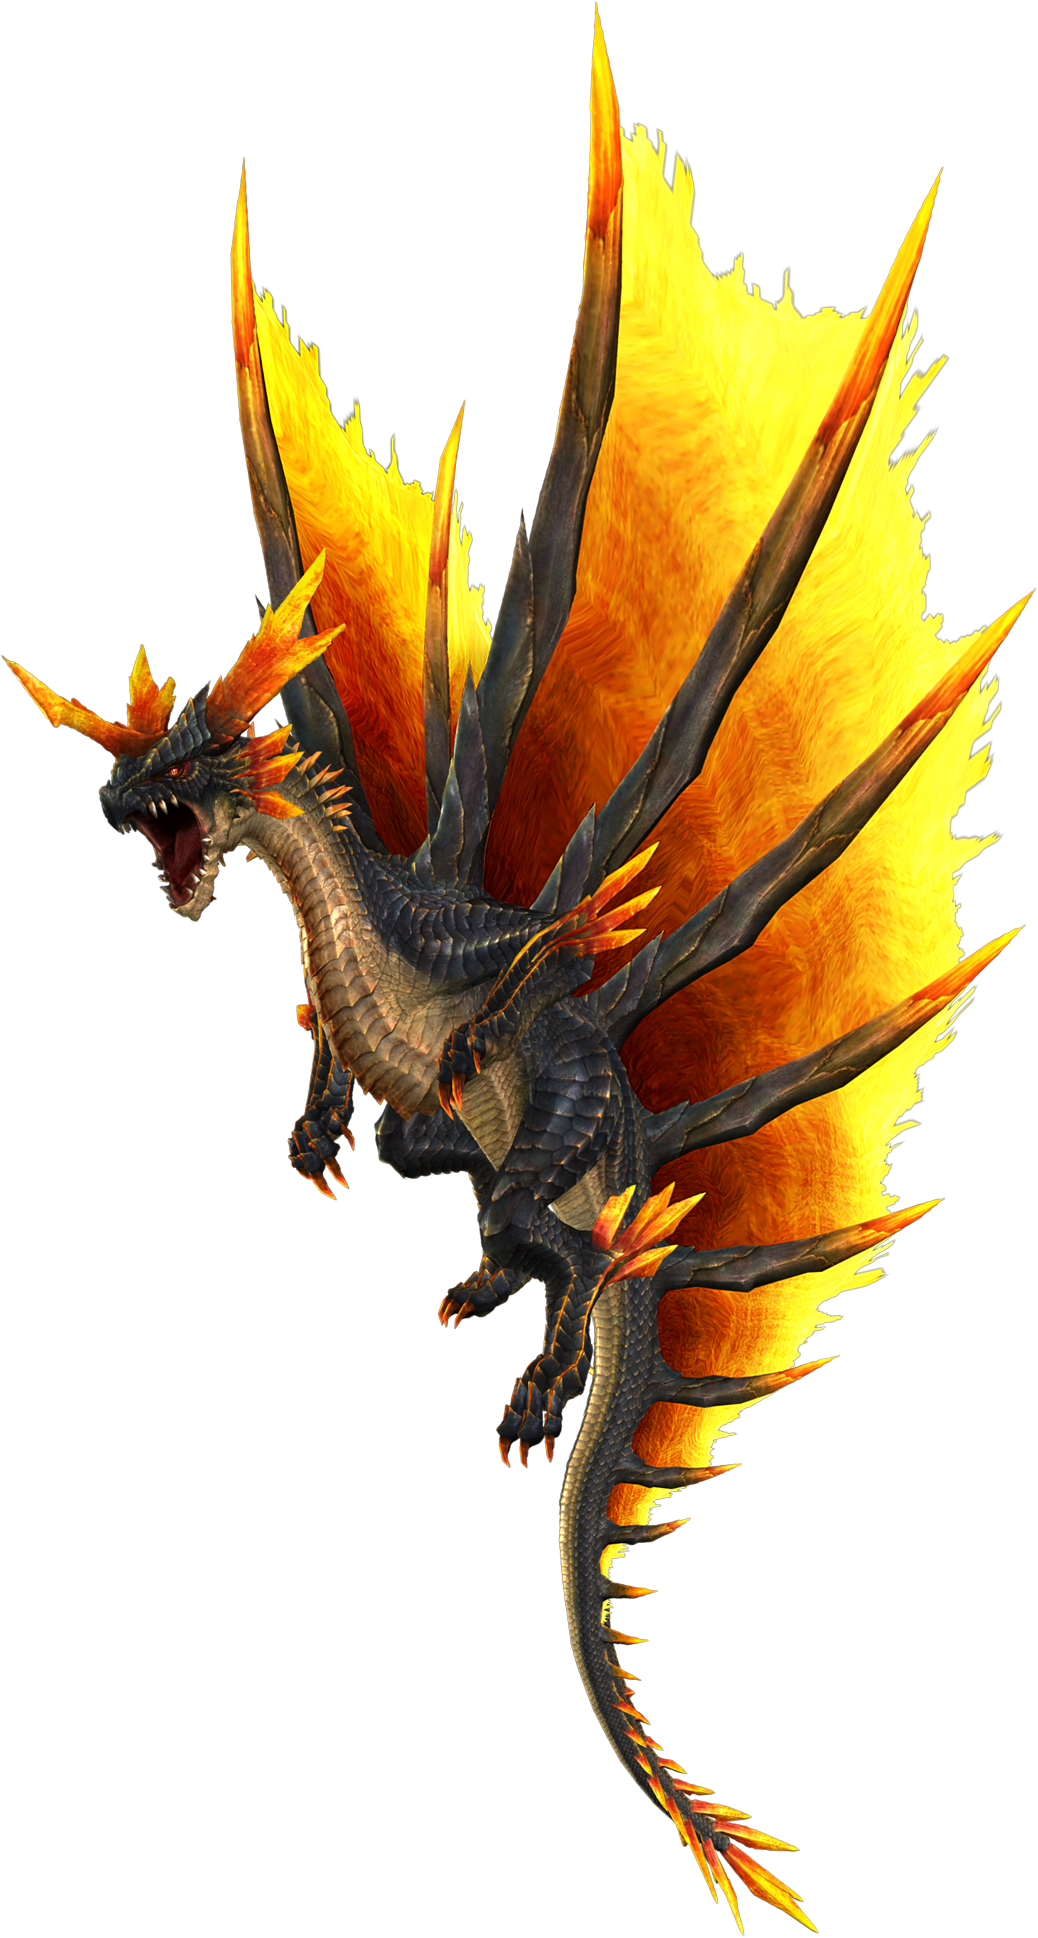 User blog:Lord Loss/Discussion of the Week: Monster Hunter Frontier